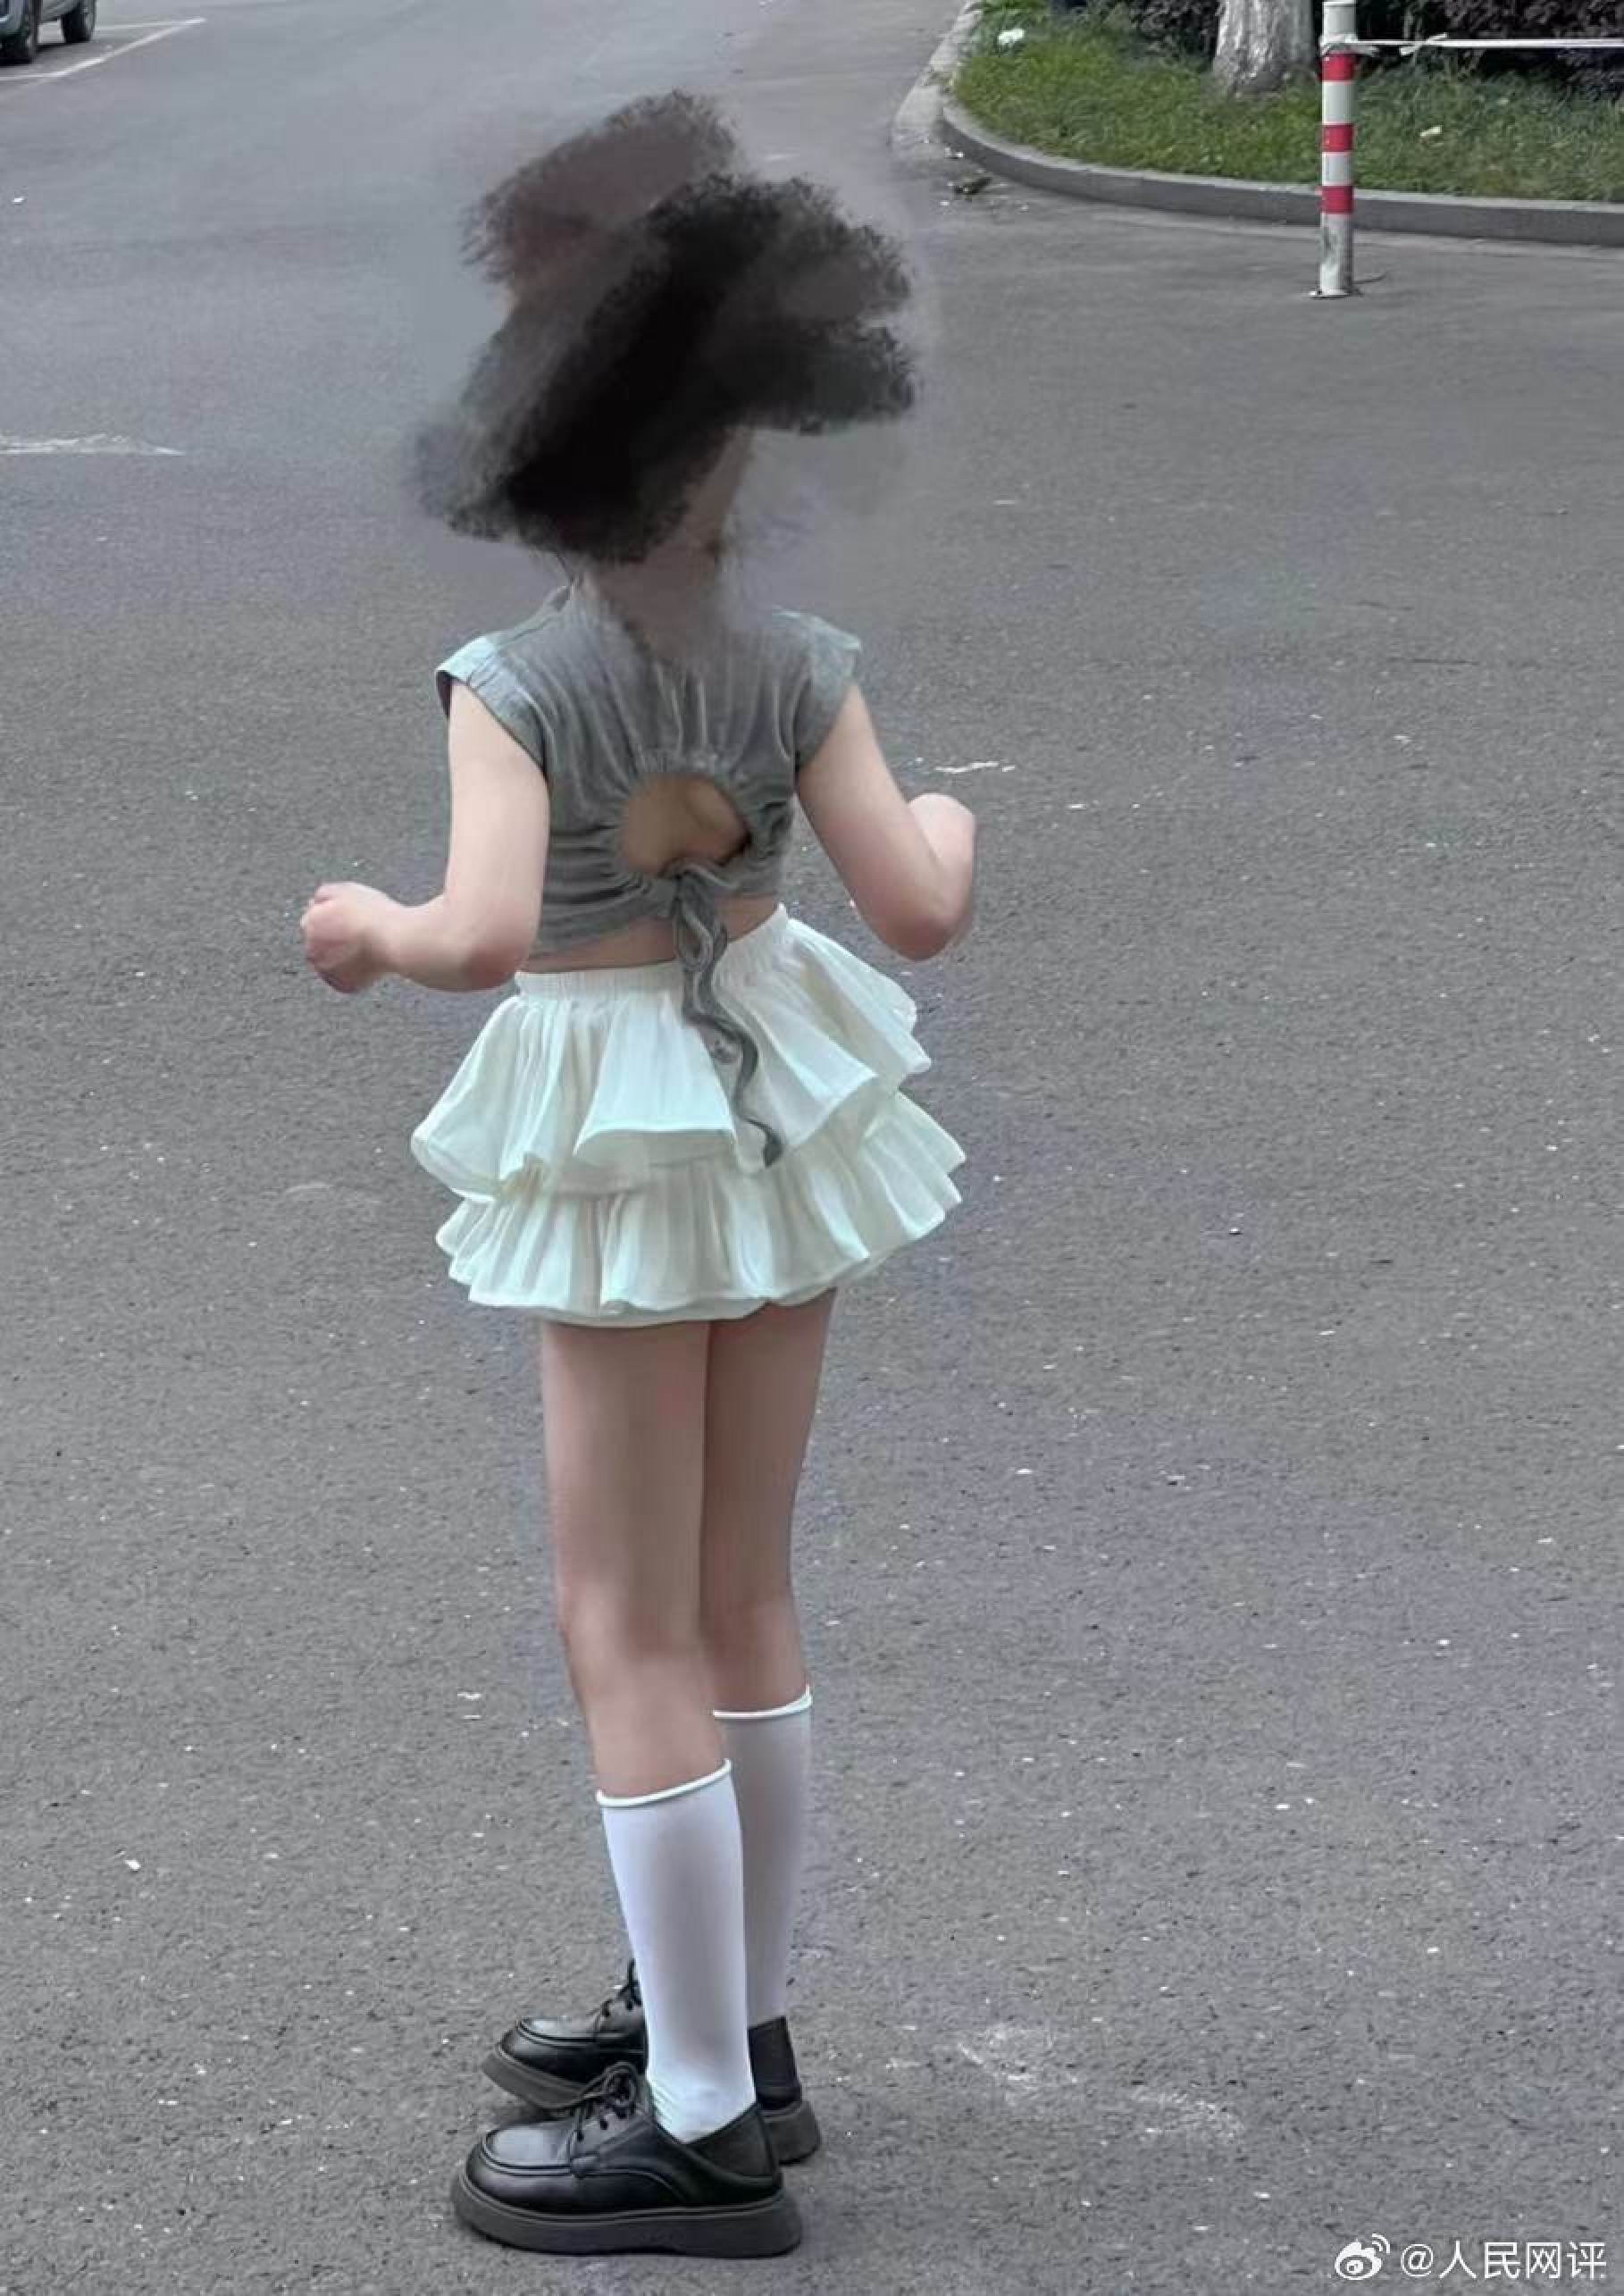 inappropriate pictures of little girls